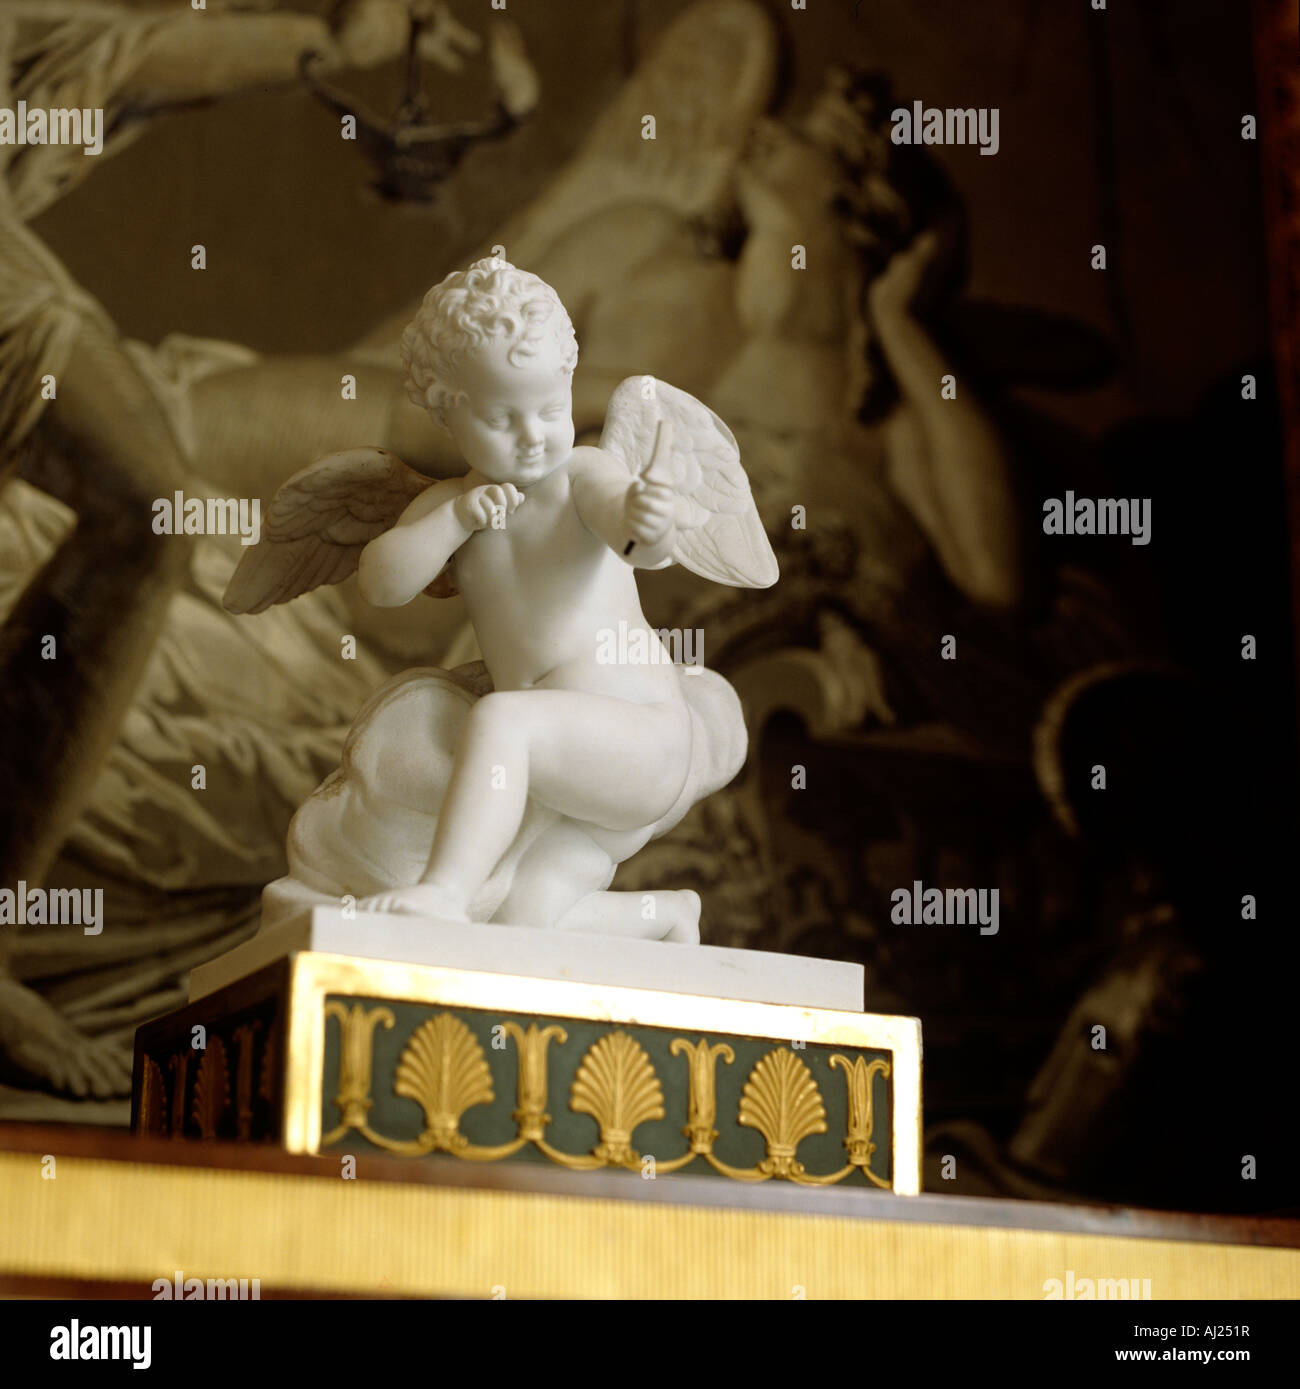 White marble cherub statue on ornate plinth with religious art in back ground Stock Photo